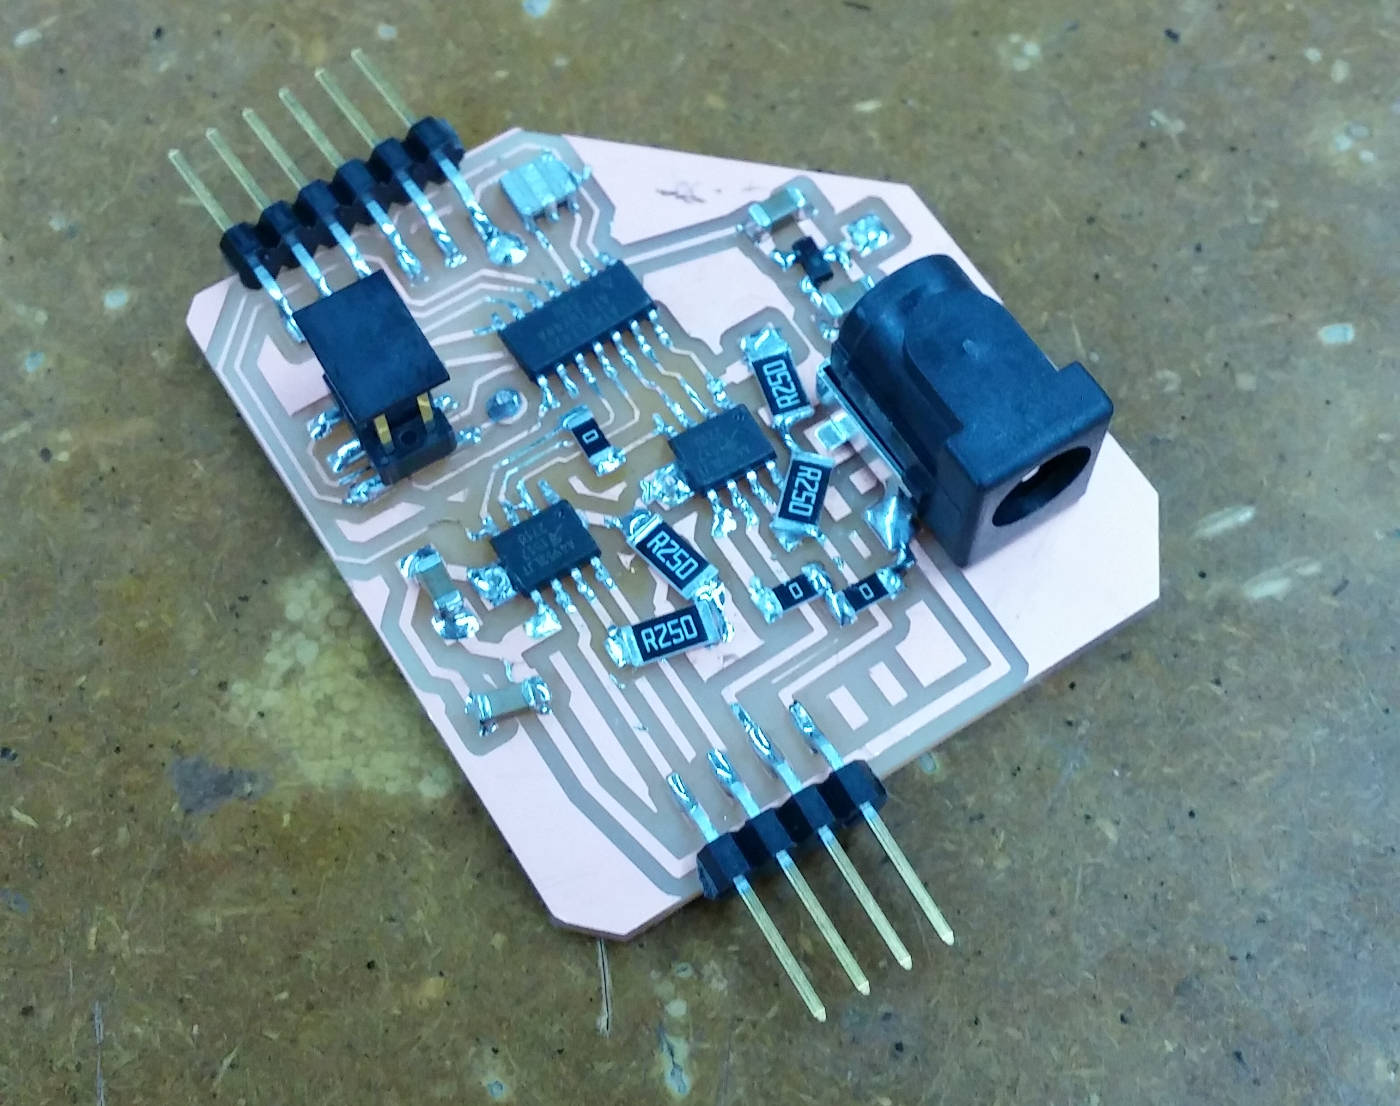 A photo of the final stepper motor driver board